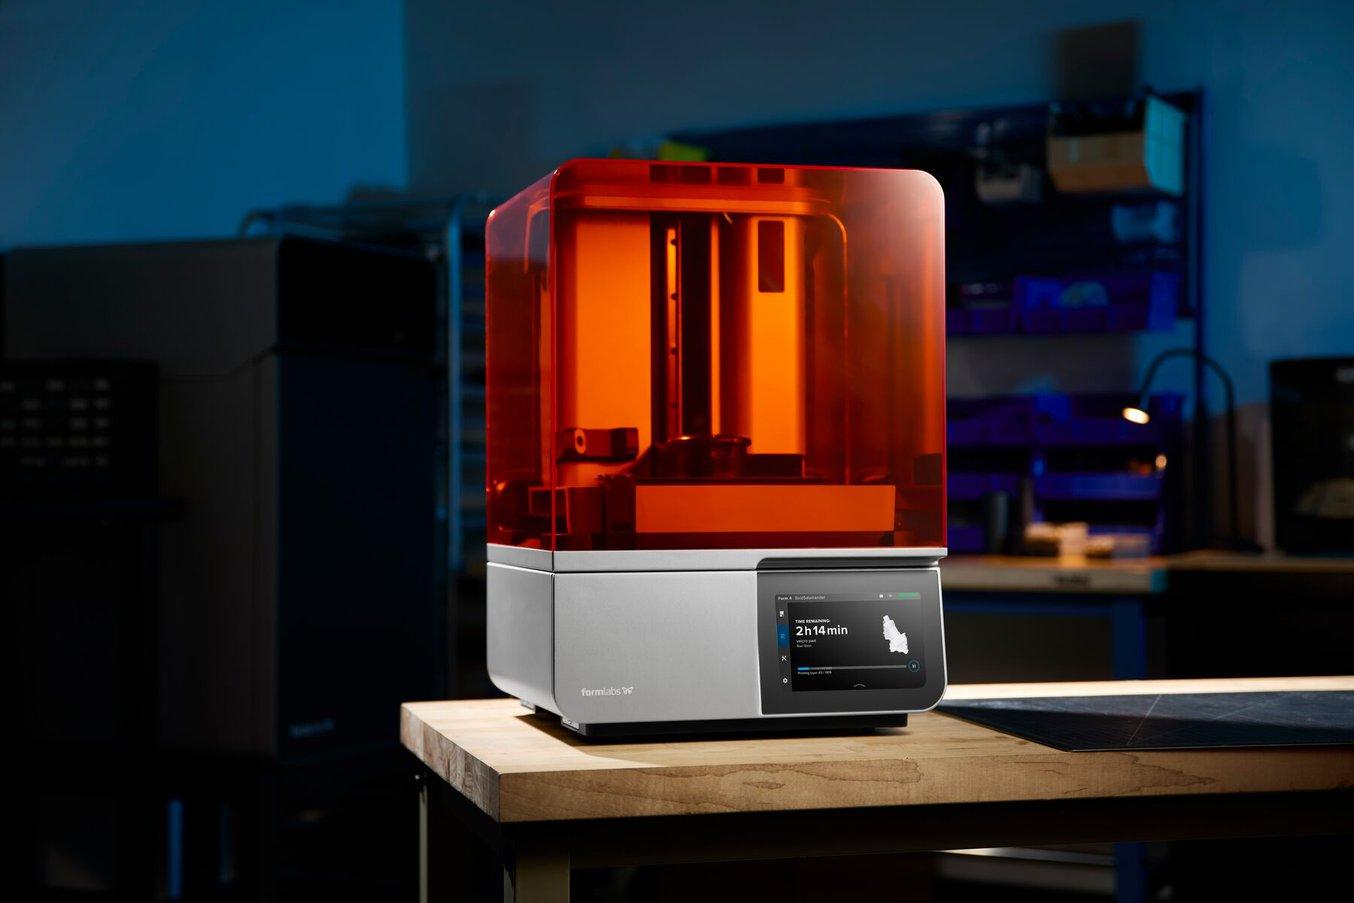 the Form 4, Formlabs industry-leading stereolithography 3D printer